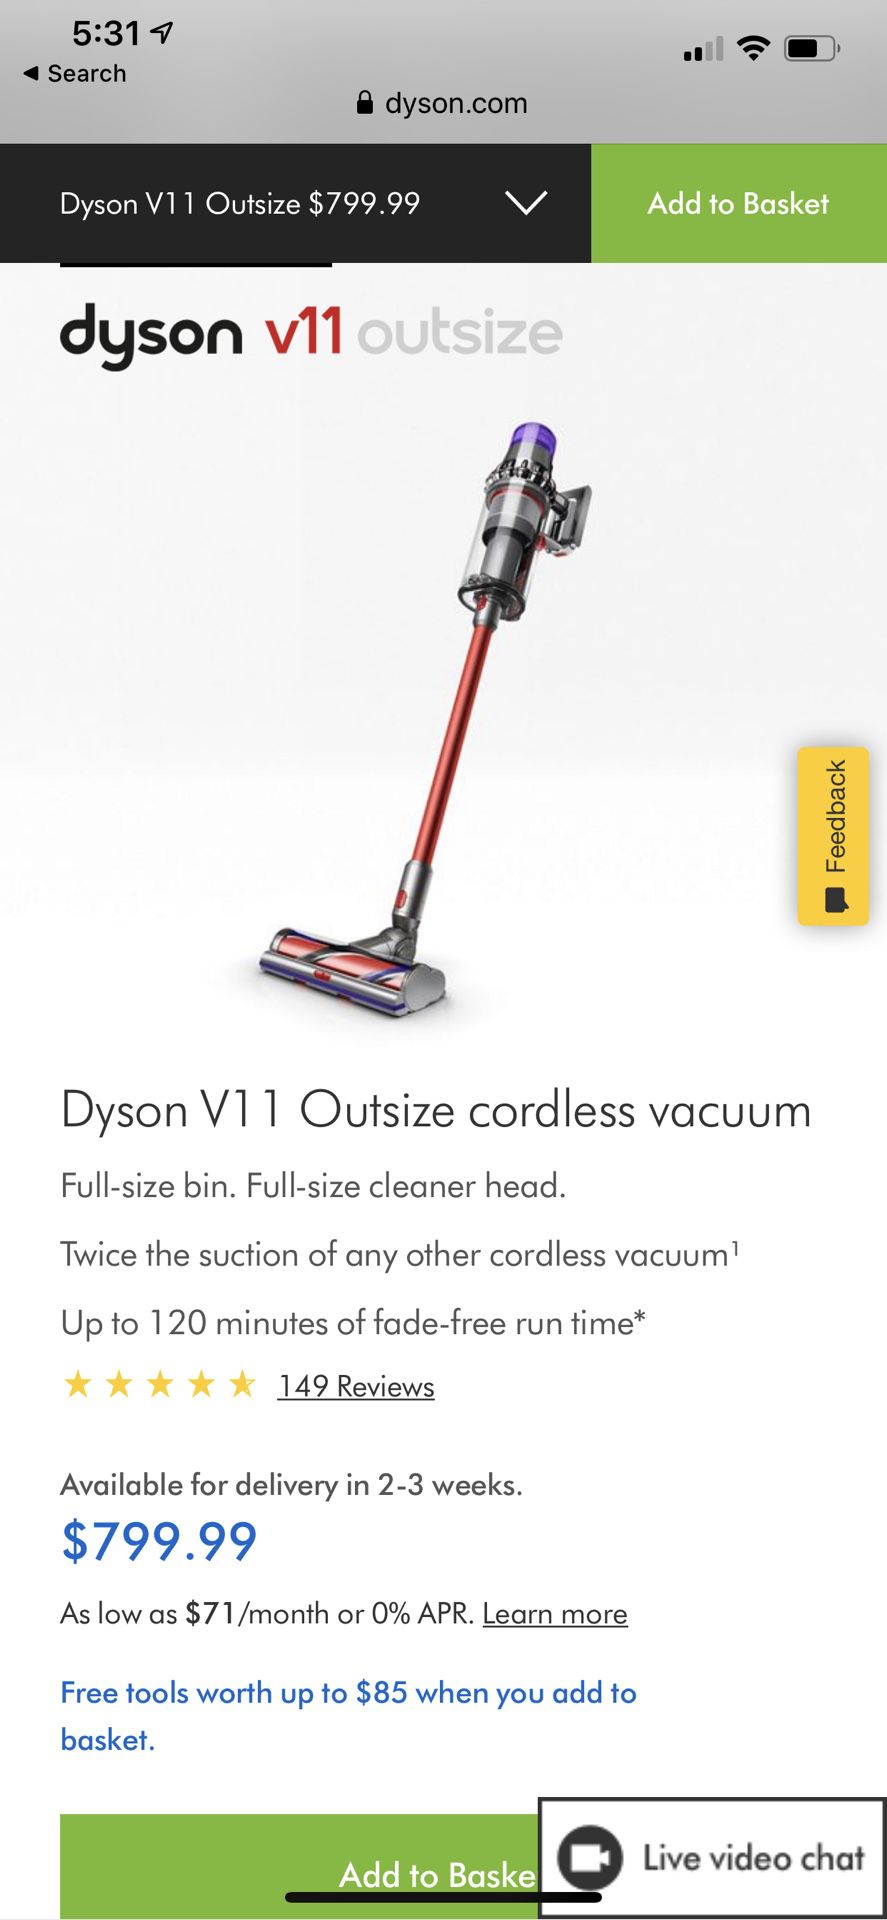 Dyson V11 OUTSIZE Full-size bin. Full-size cleaner head. Twice the suction of any other cordless vacuum¹ Up to 120 minutes of fade-free run time